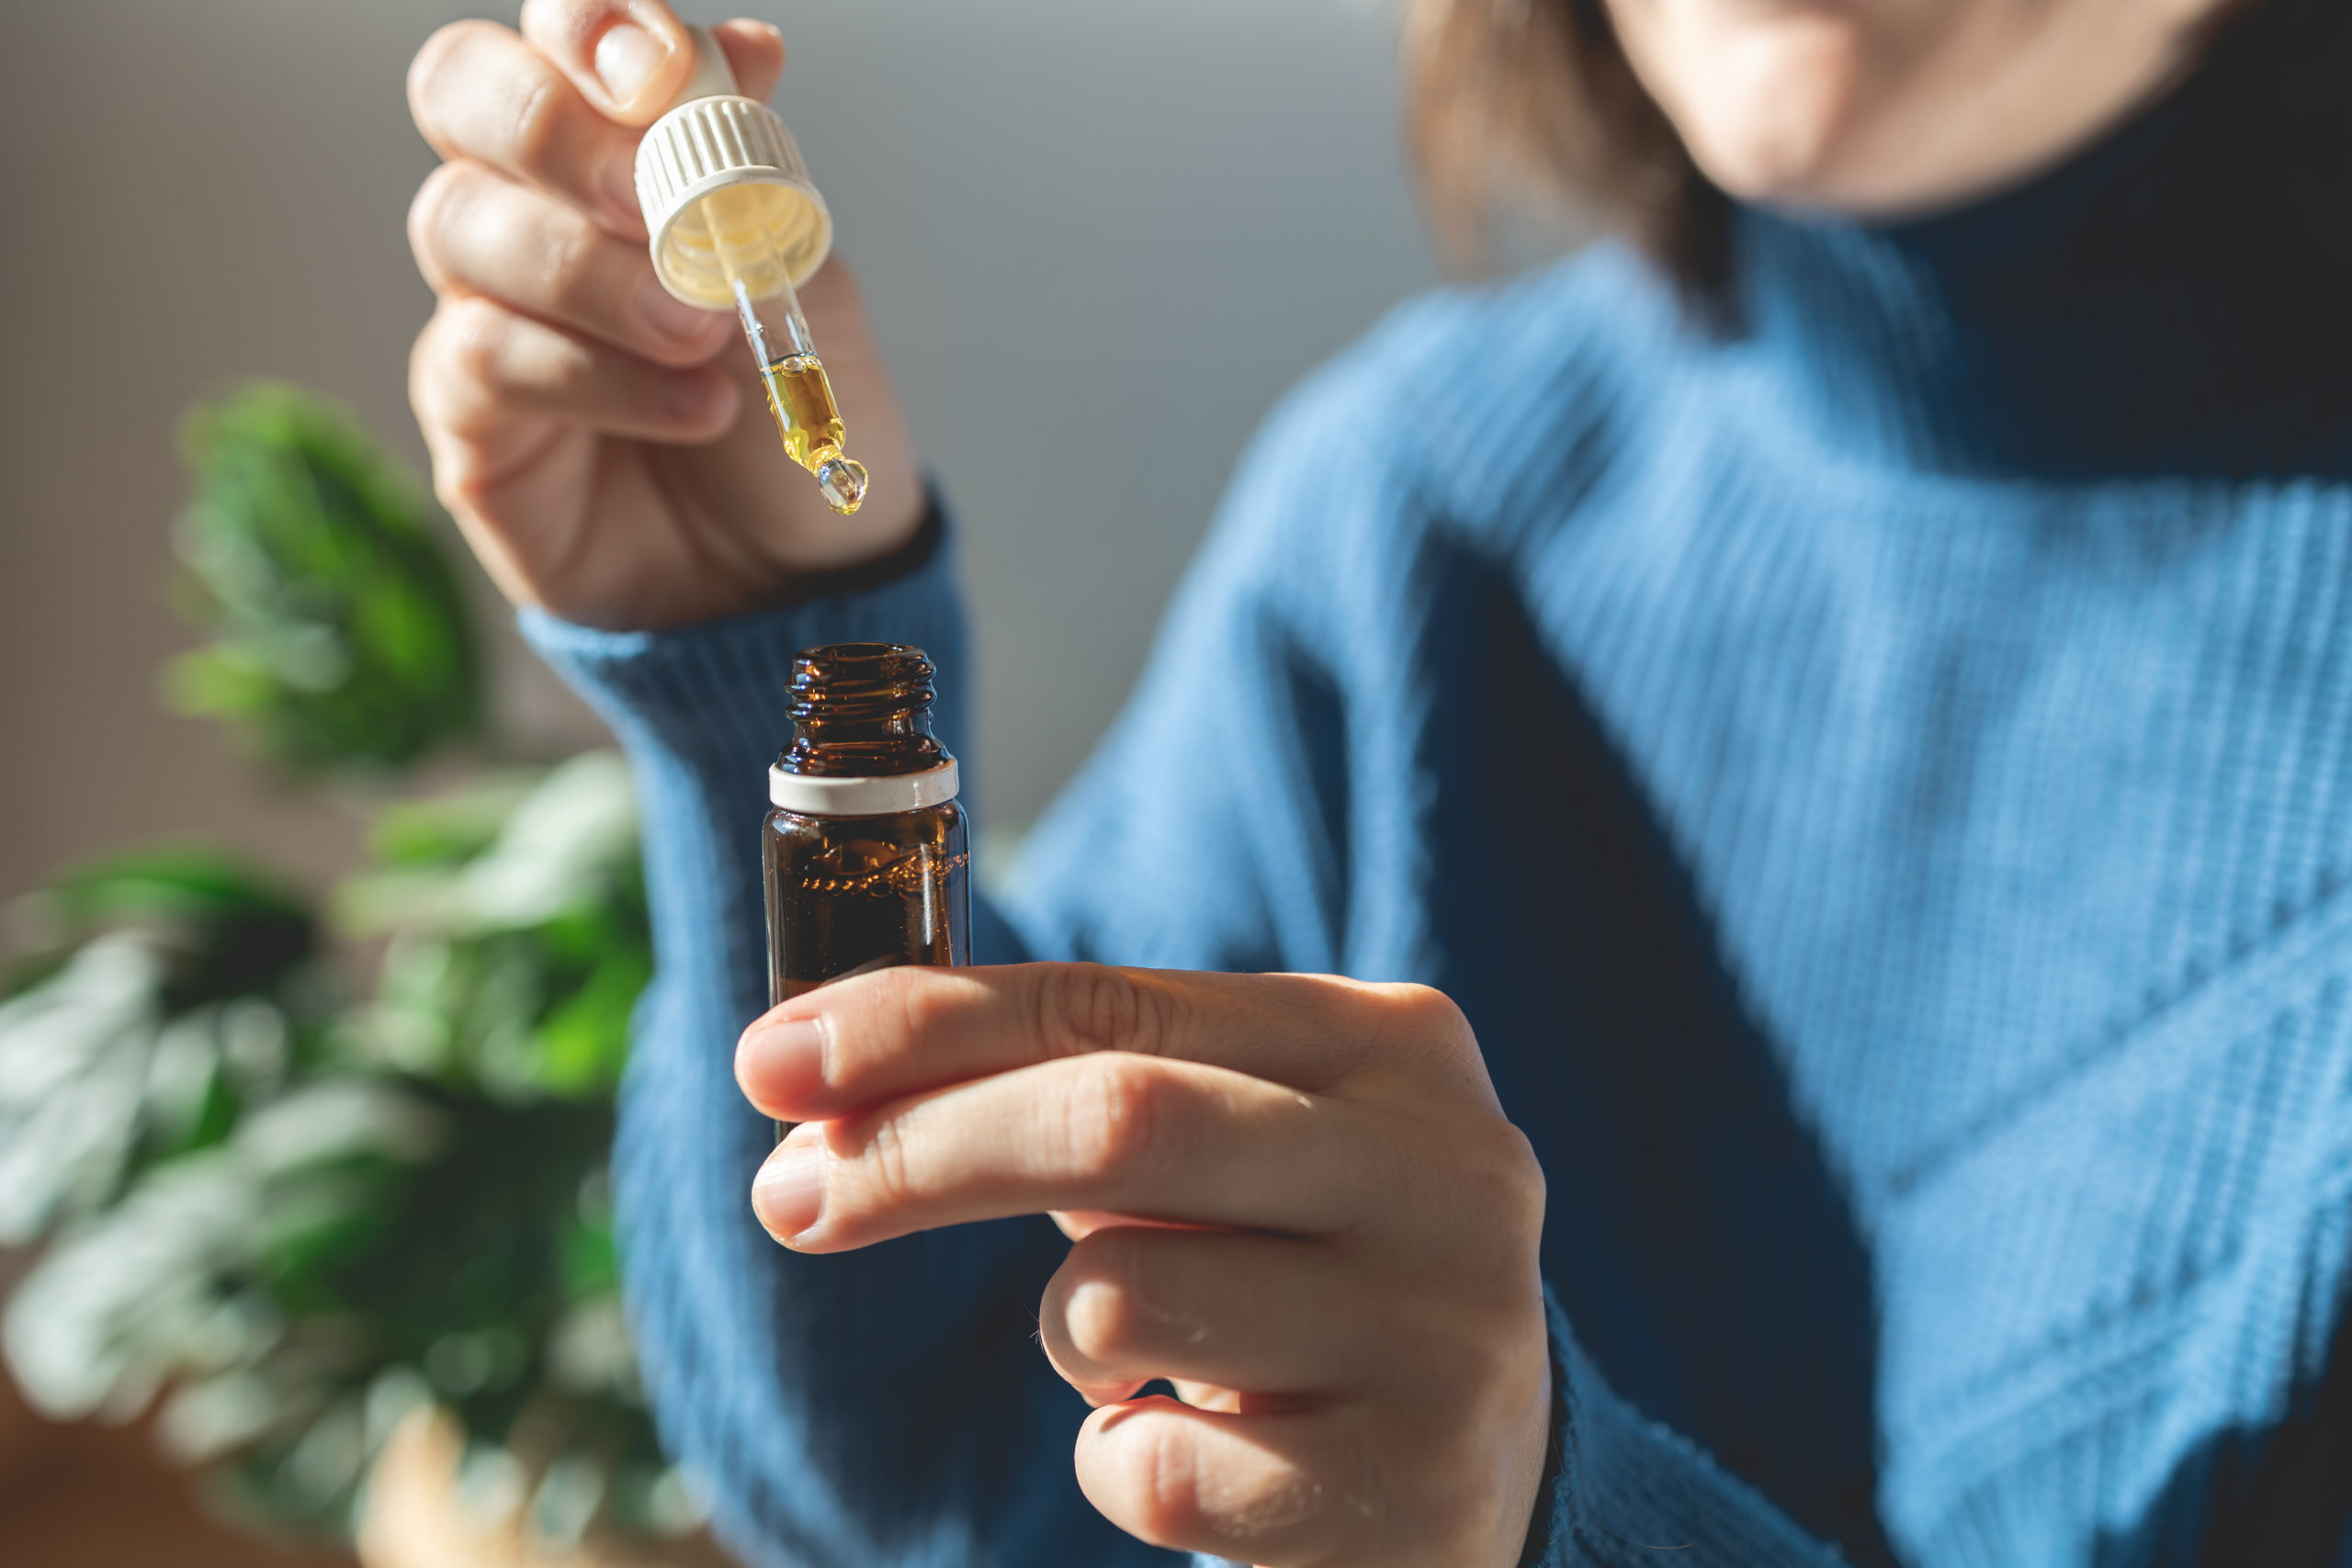 How-to Take CBD: Guide to CBD Dosage for Beginners + Health Benefits